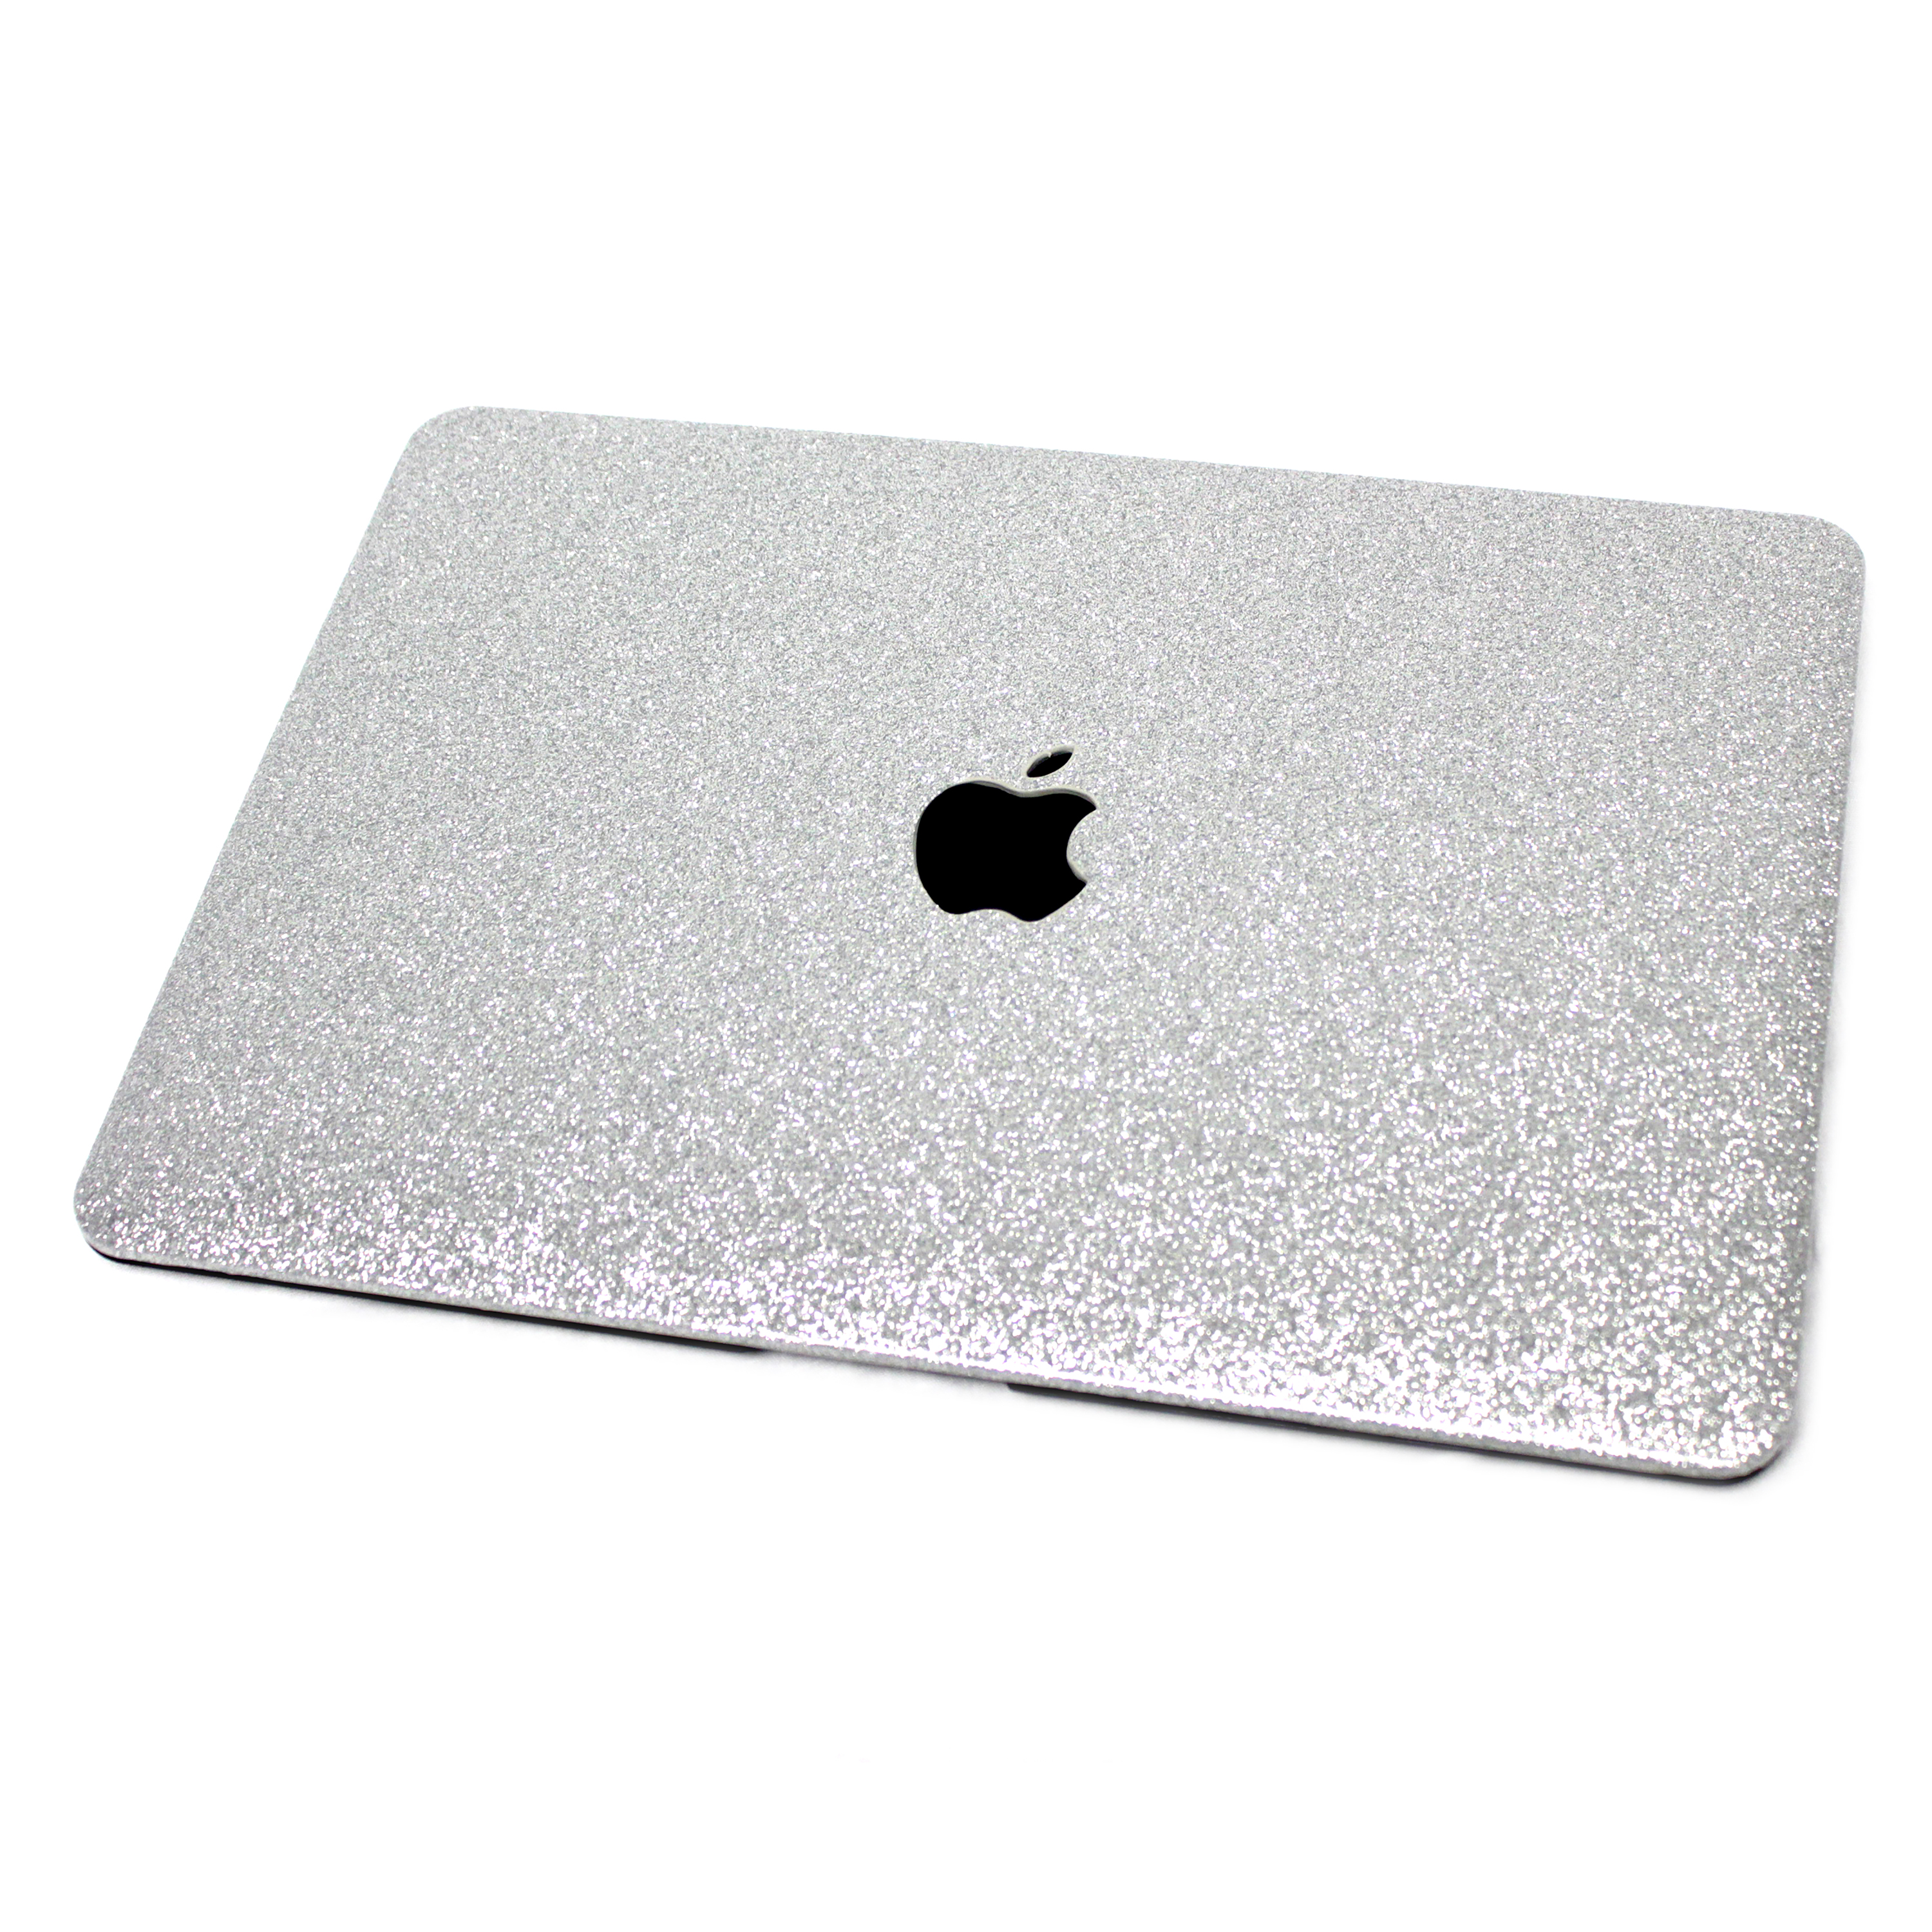 EmbraceCase MacBook Air 13″ Case Plastic Hard Shell Cover for 